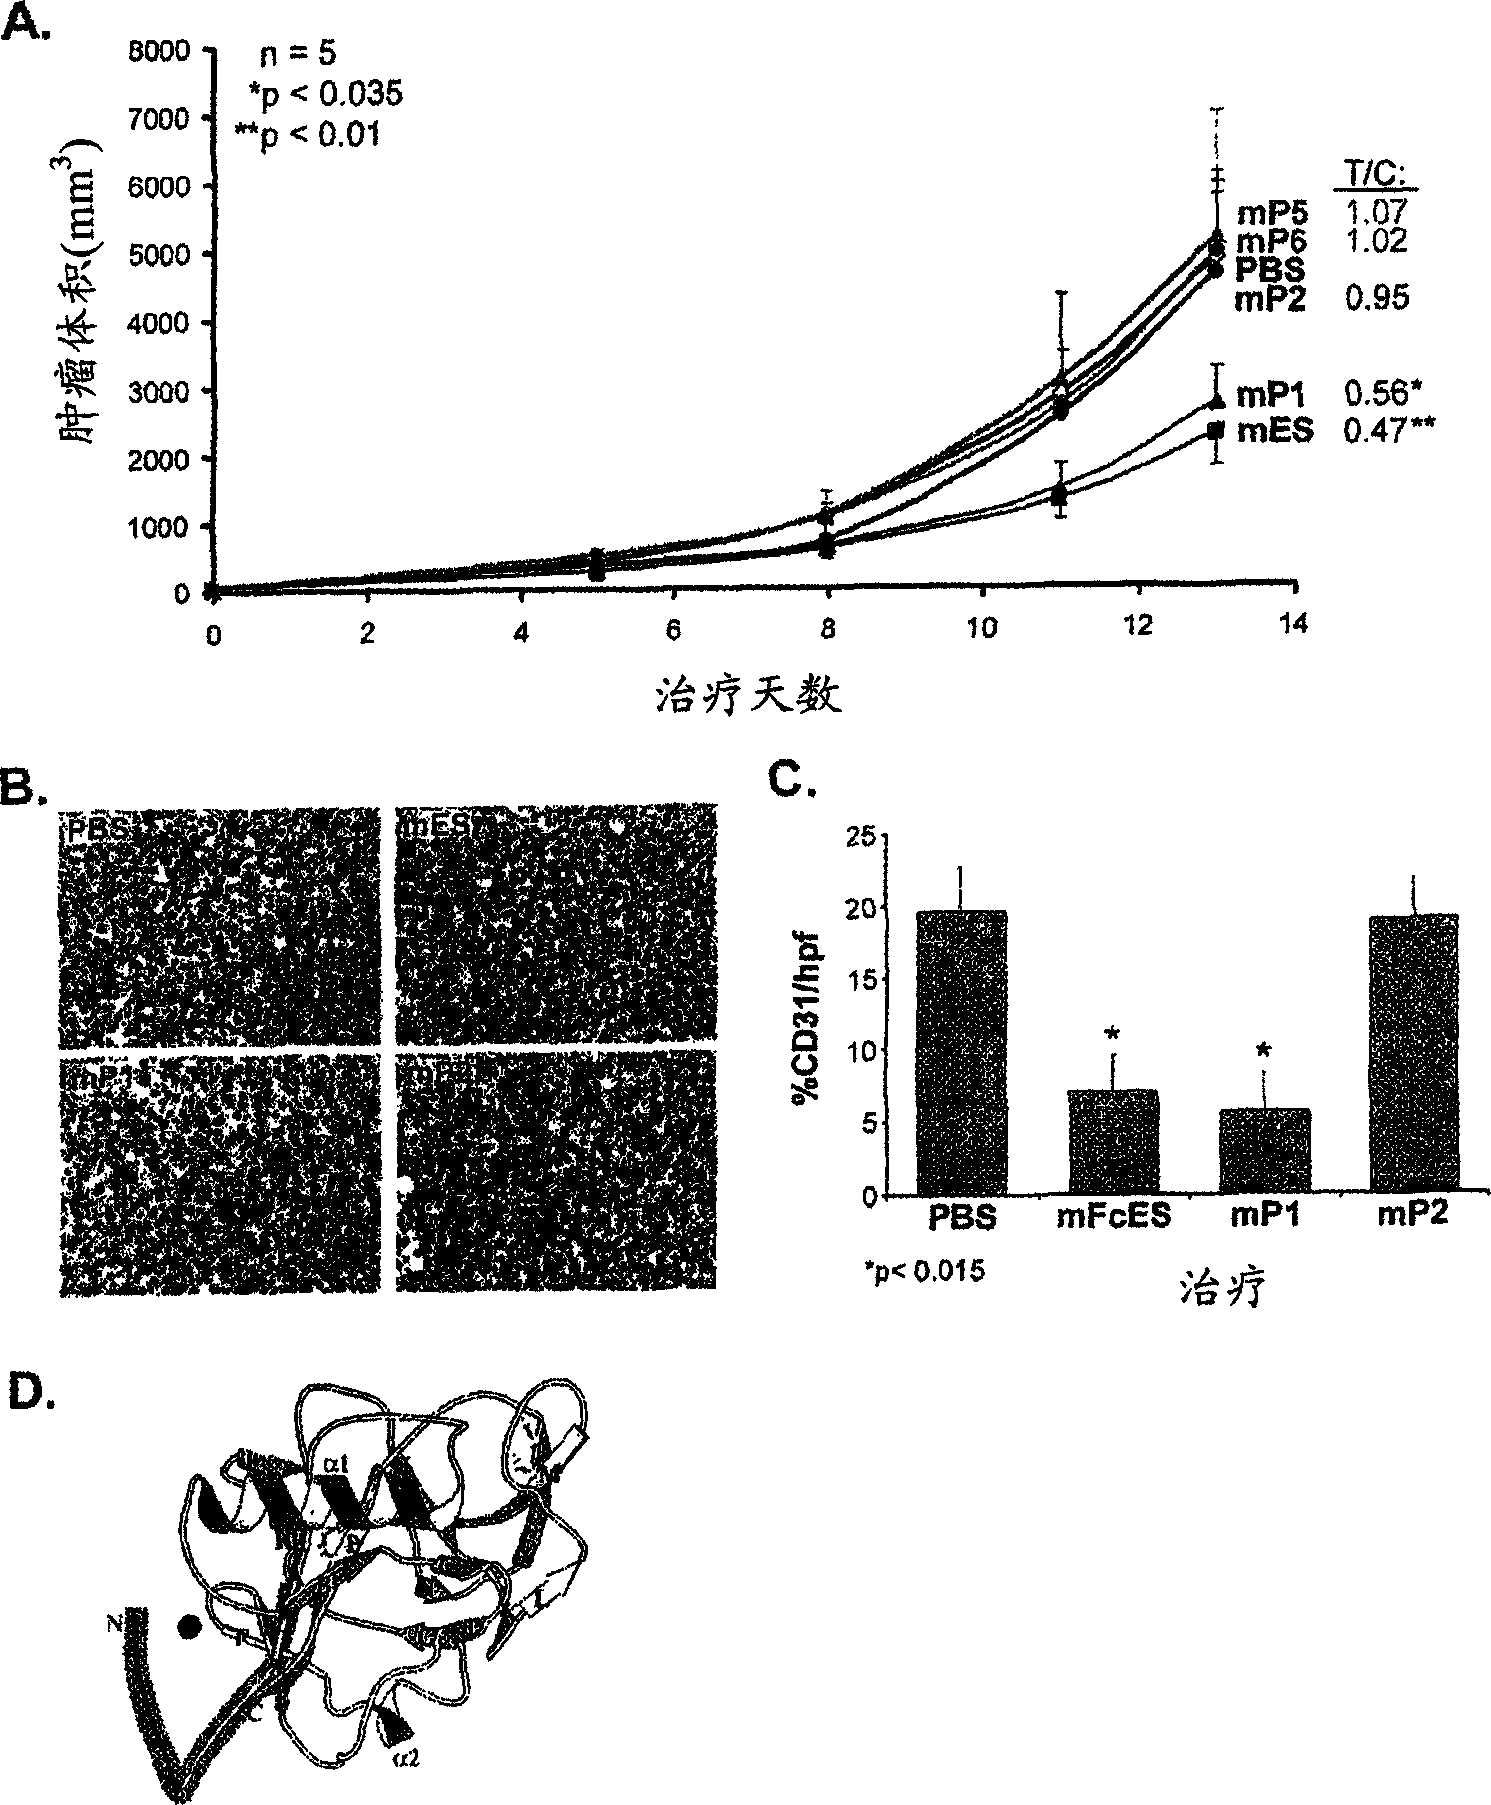 Anti-angiogenic peptides from the N-terminus of endostatin